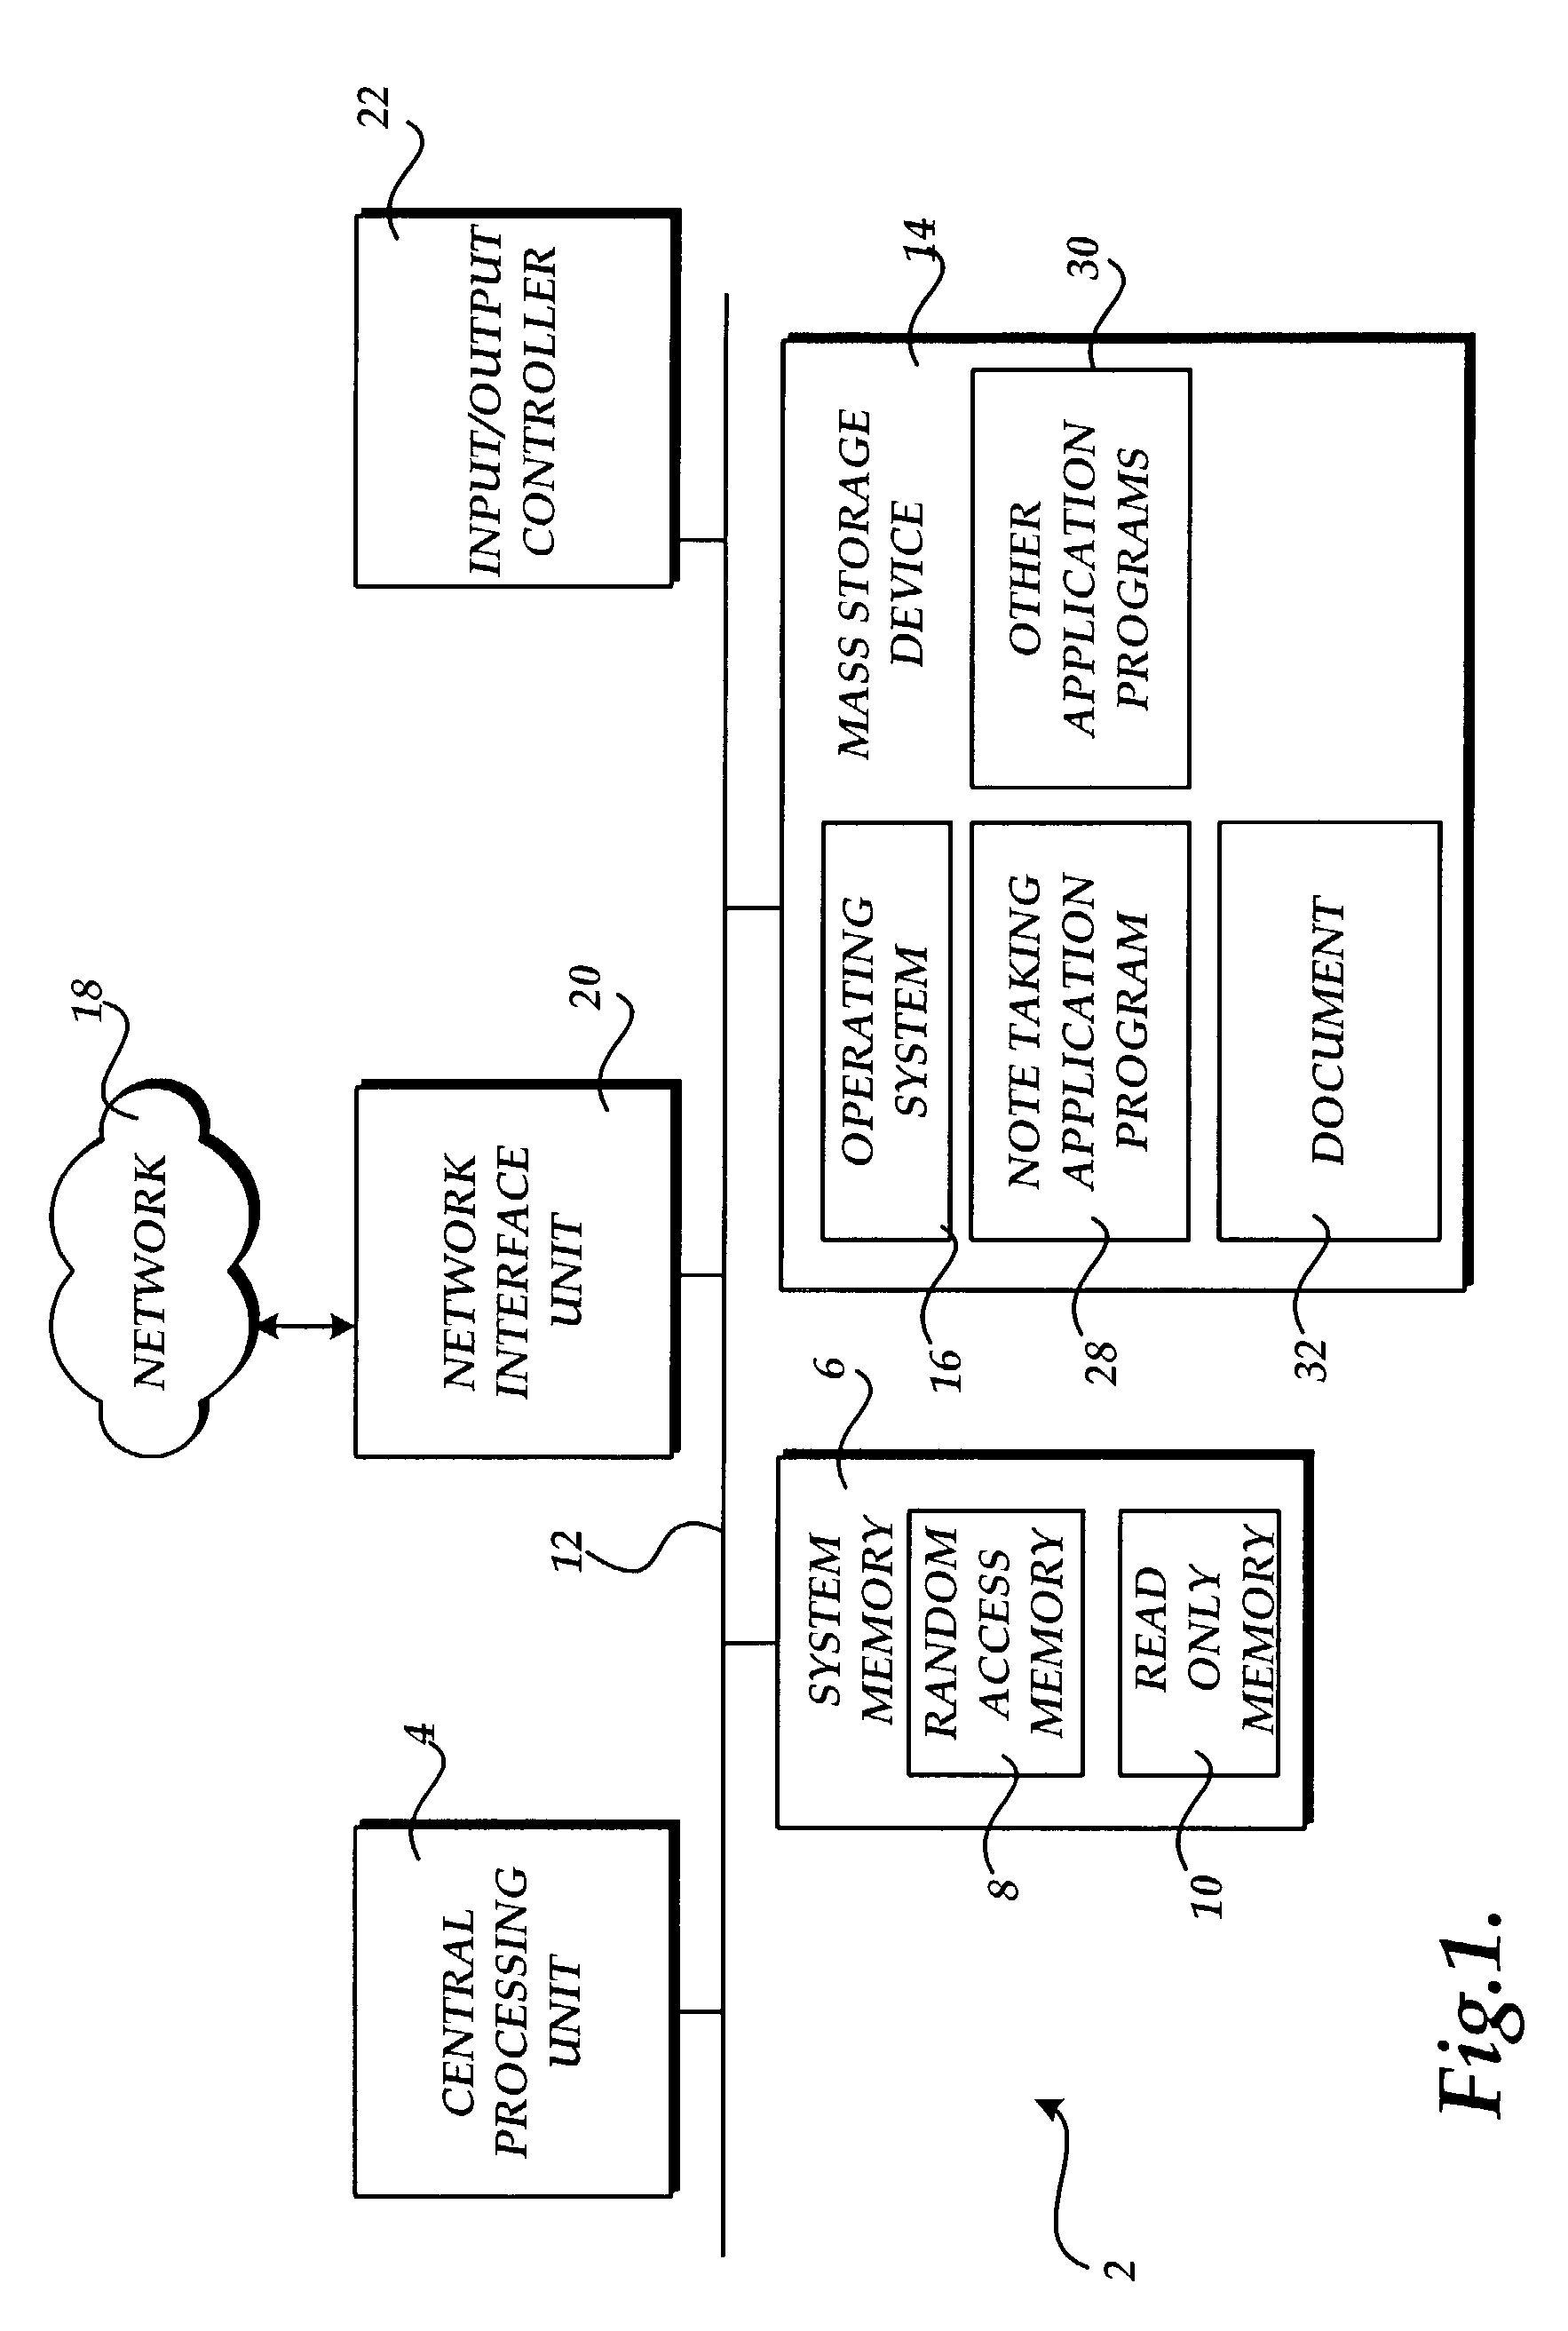 Method, apparatus, and computer-readable medium for creating asides within an electronic document